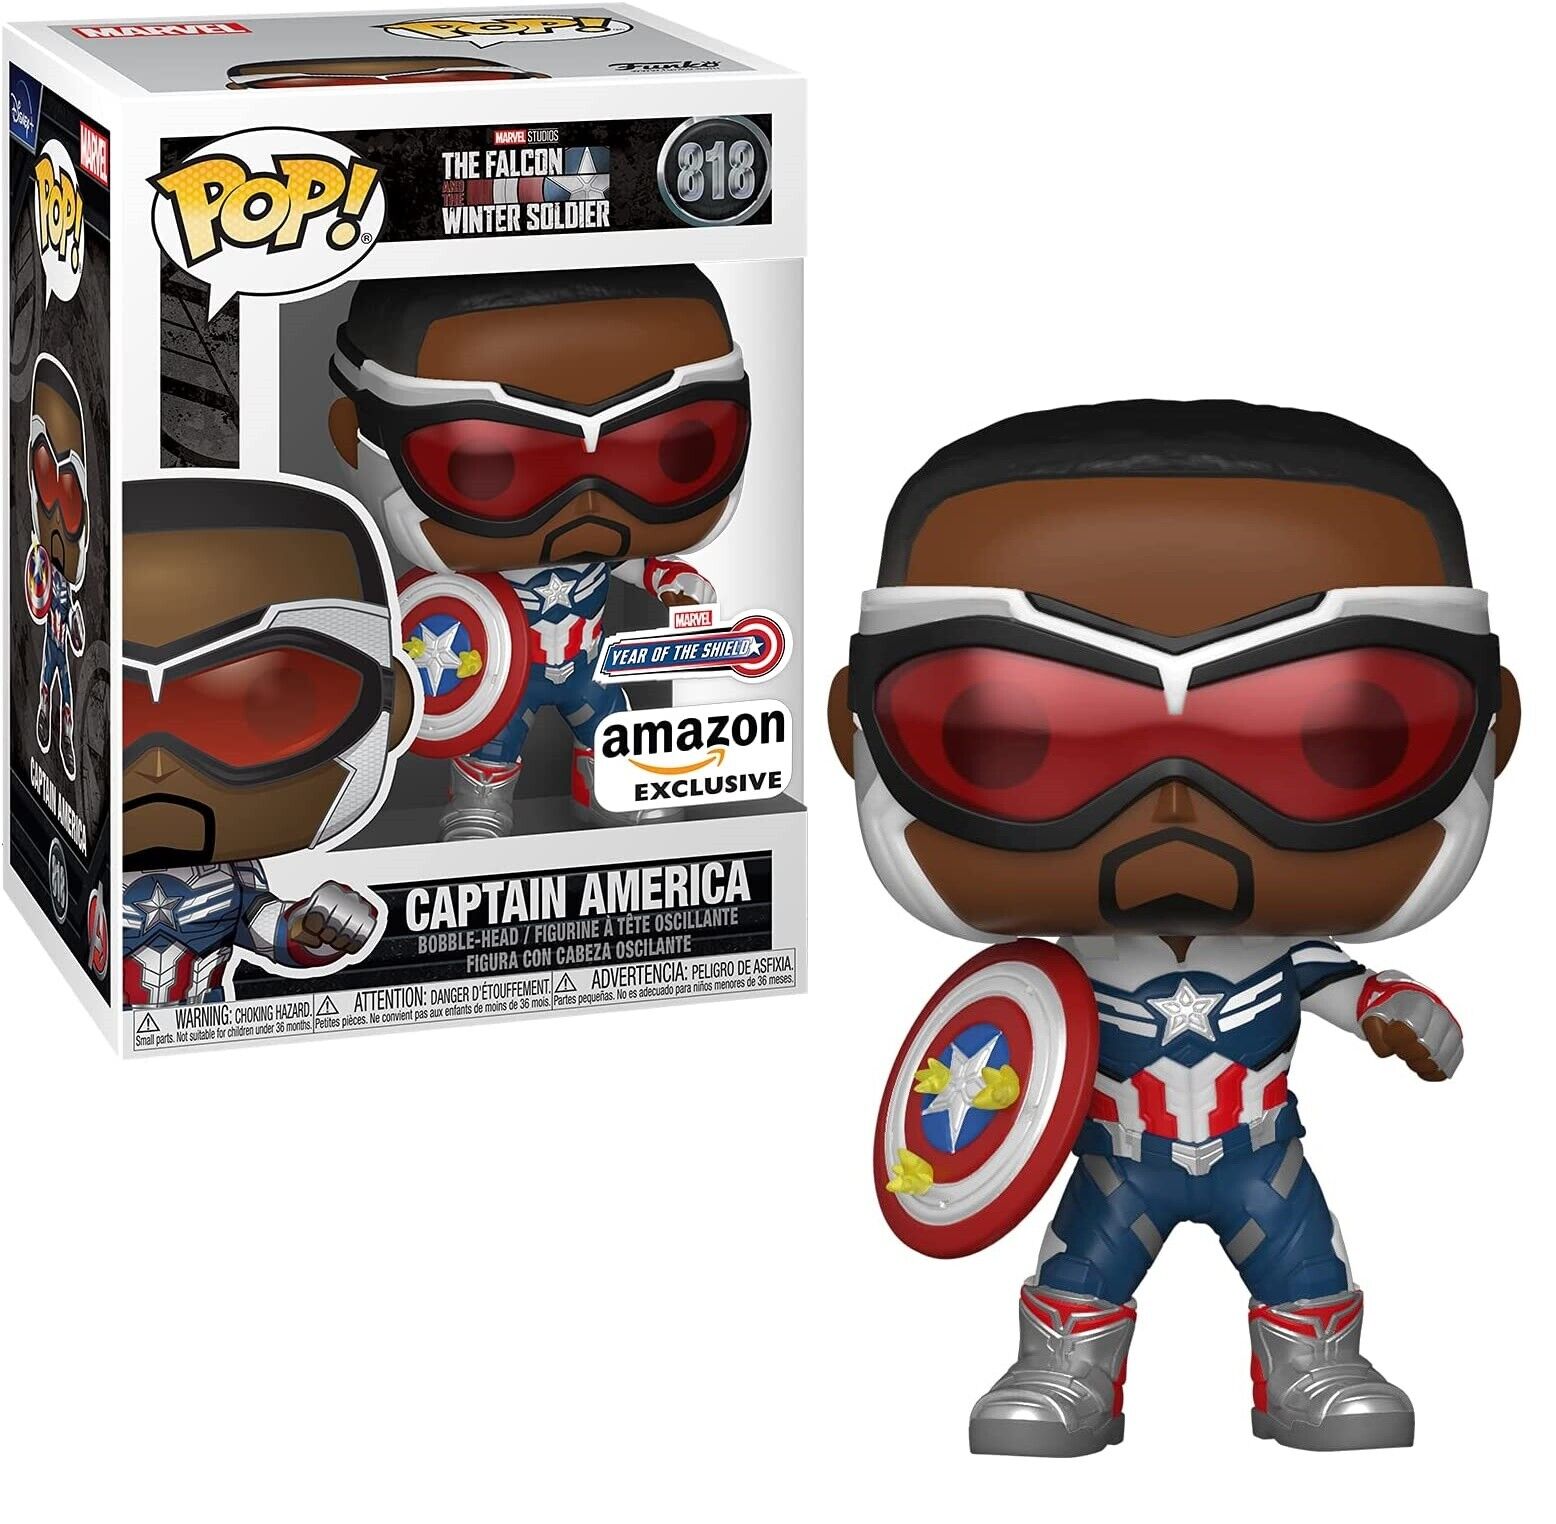 The Falcon and the Winter Soldier: Captain America (Year of the Shield) Funko POP! Vinyl